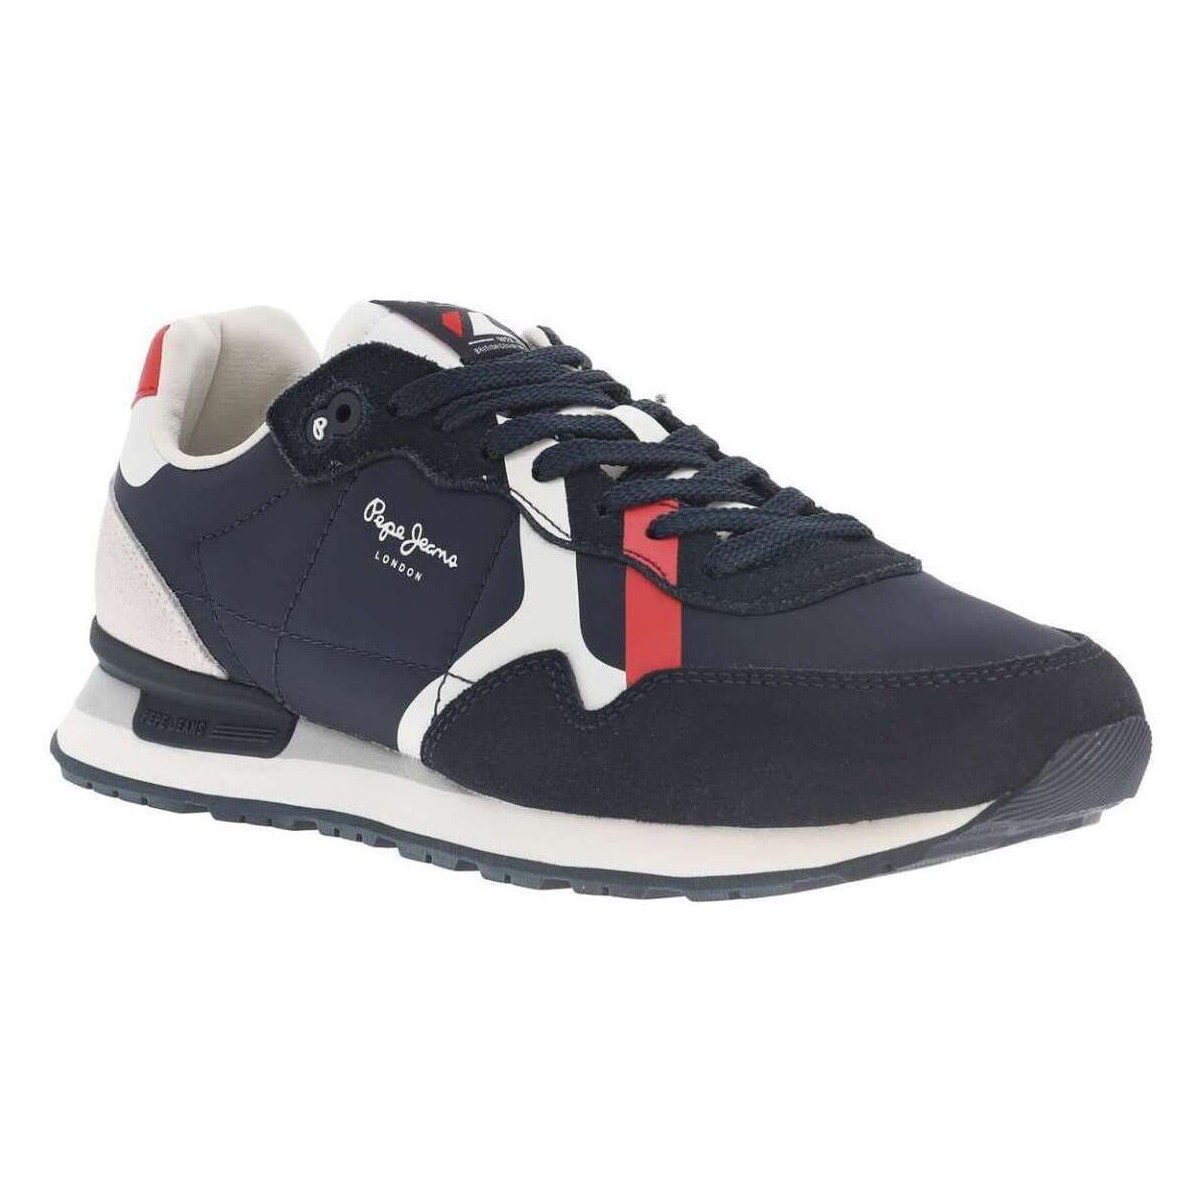 Chaussures Homme Baskets basses Pepe jeans 22359CHPE24 Marine